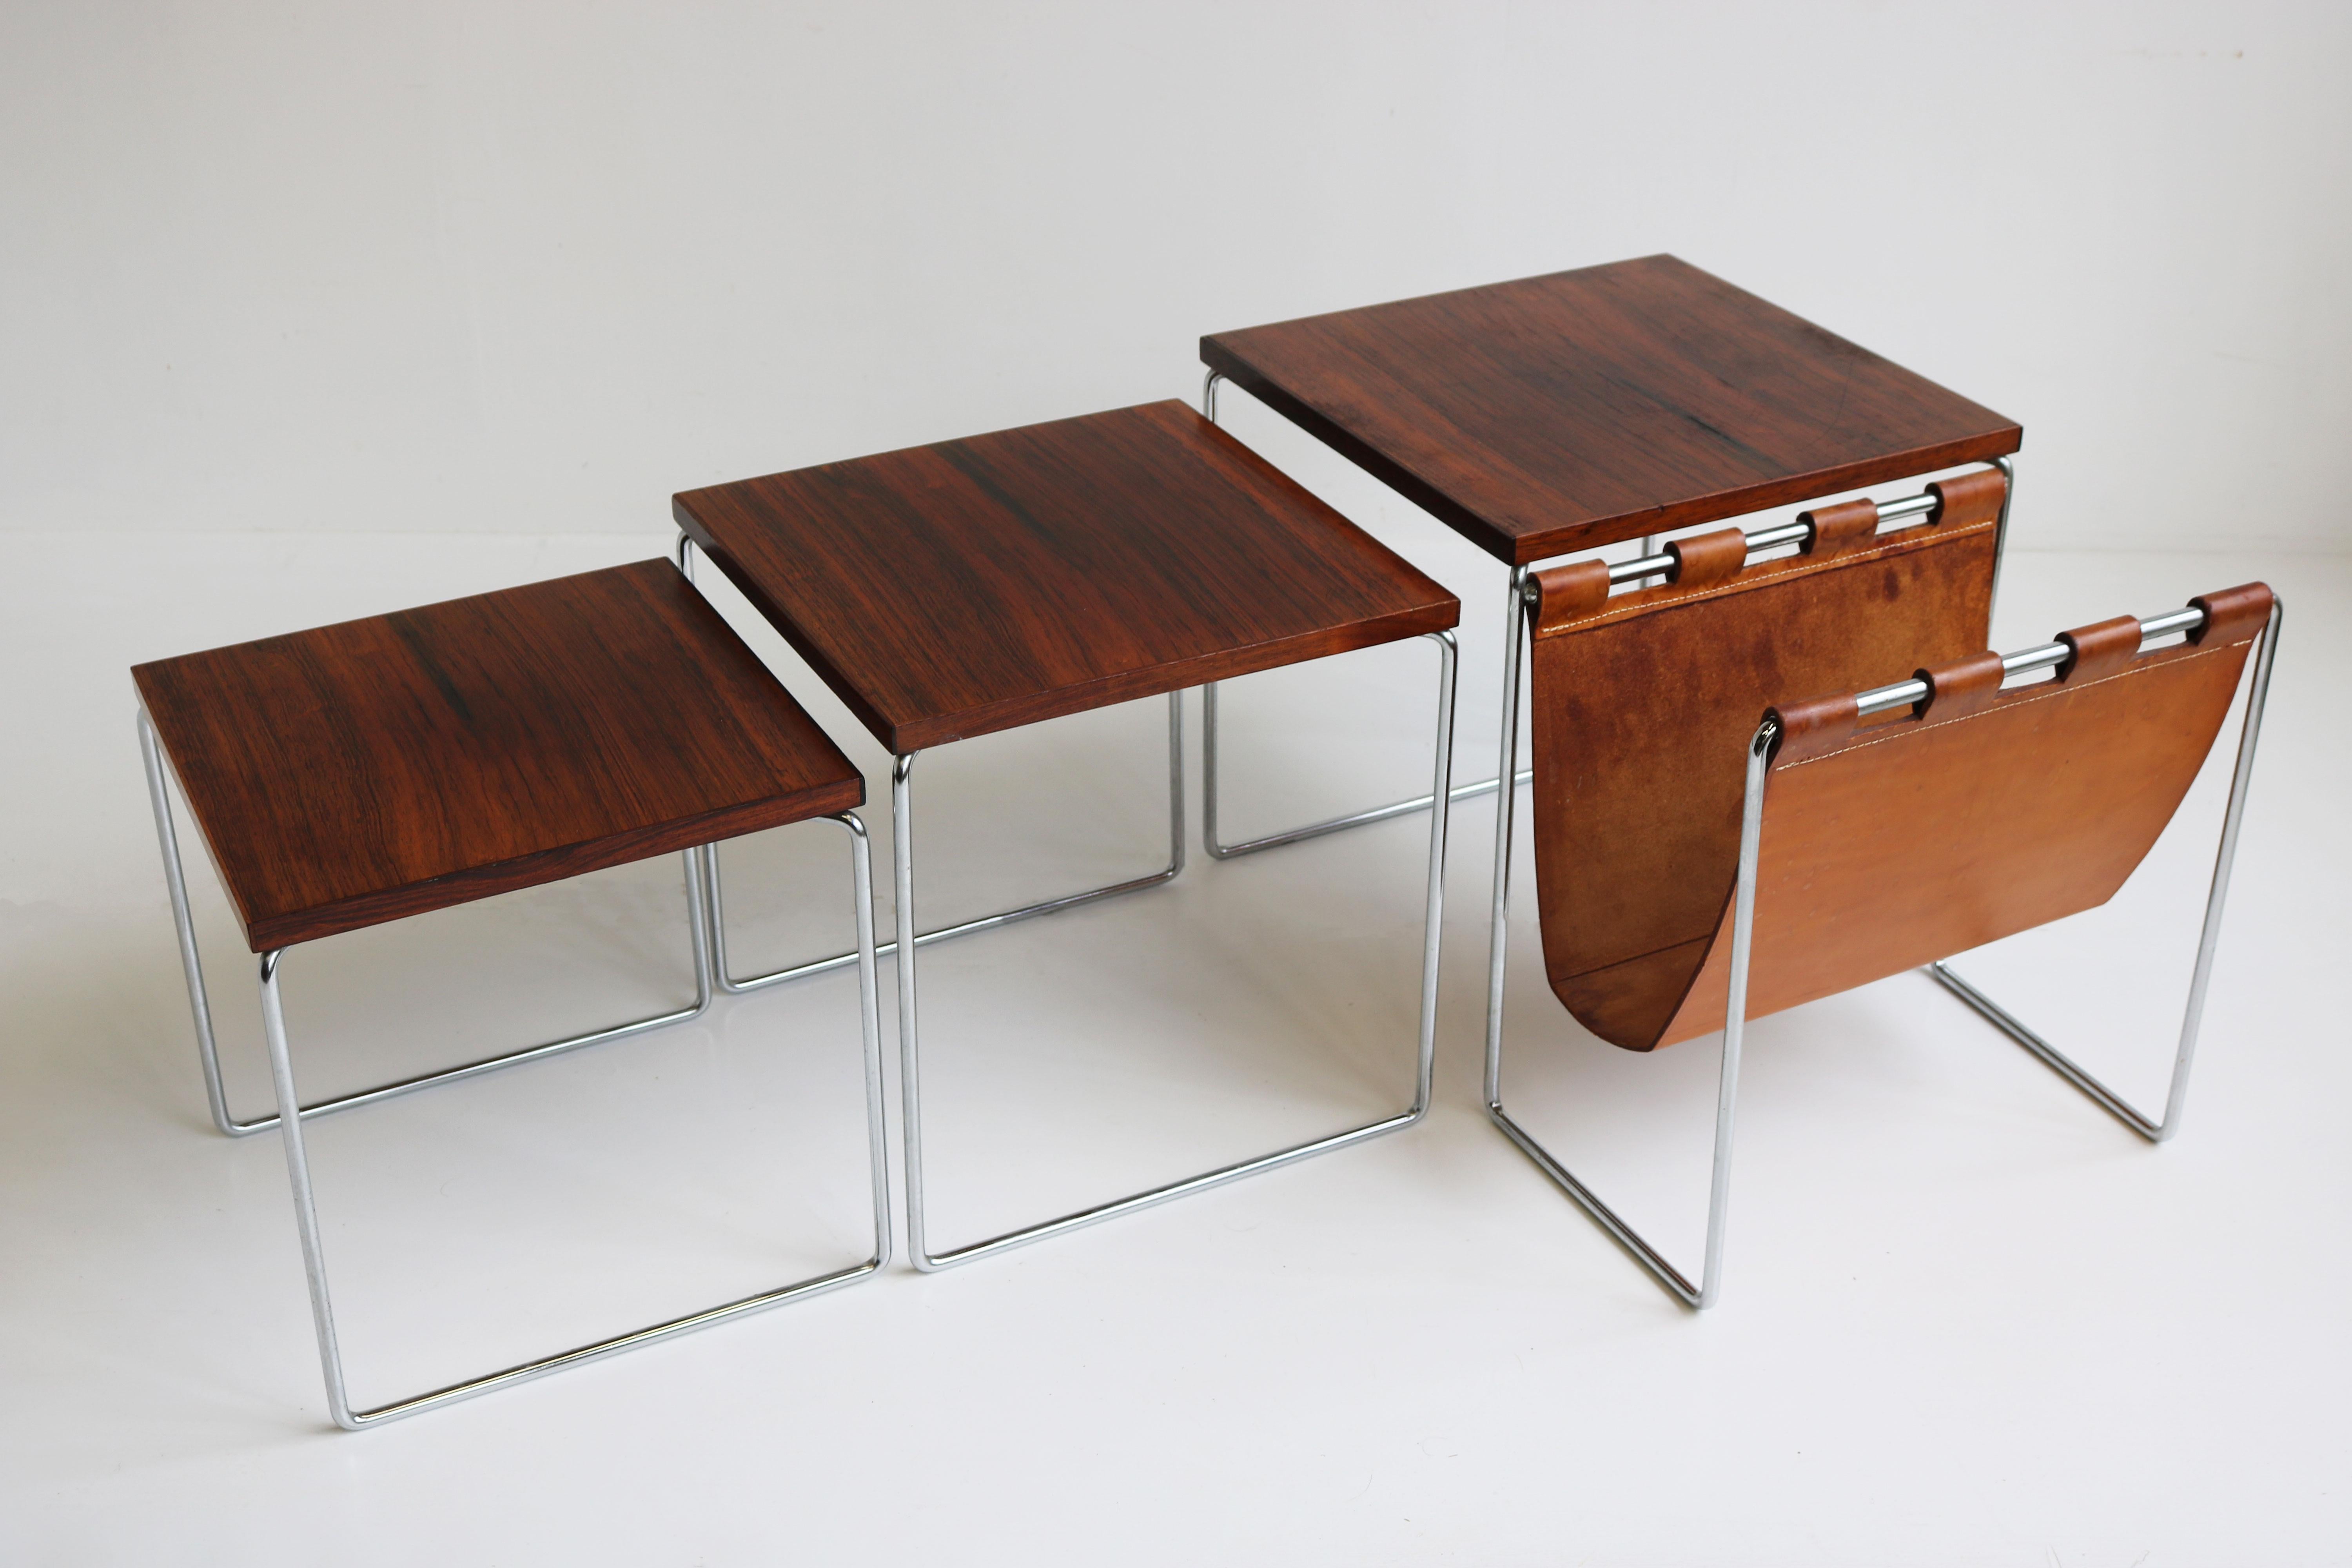 Marvelous Mid-century modern design nesting tables with Magazine holder Dutch design by Brabantia 1960.
The combination between chrome, rosewood & warm leather makes these tables timeless and a pleasure to look at. 
Very practical with the